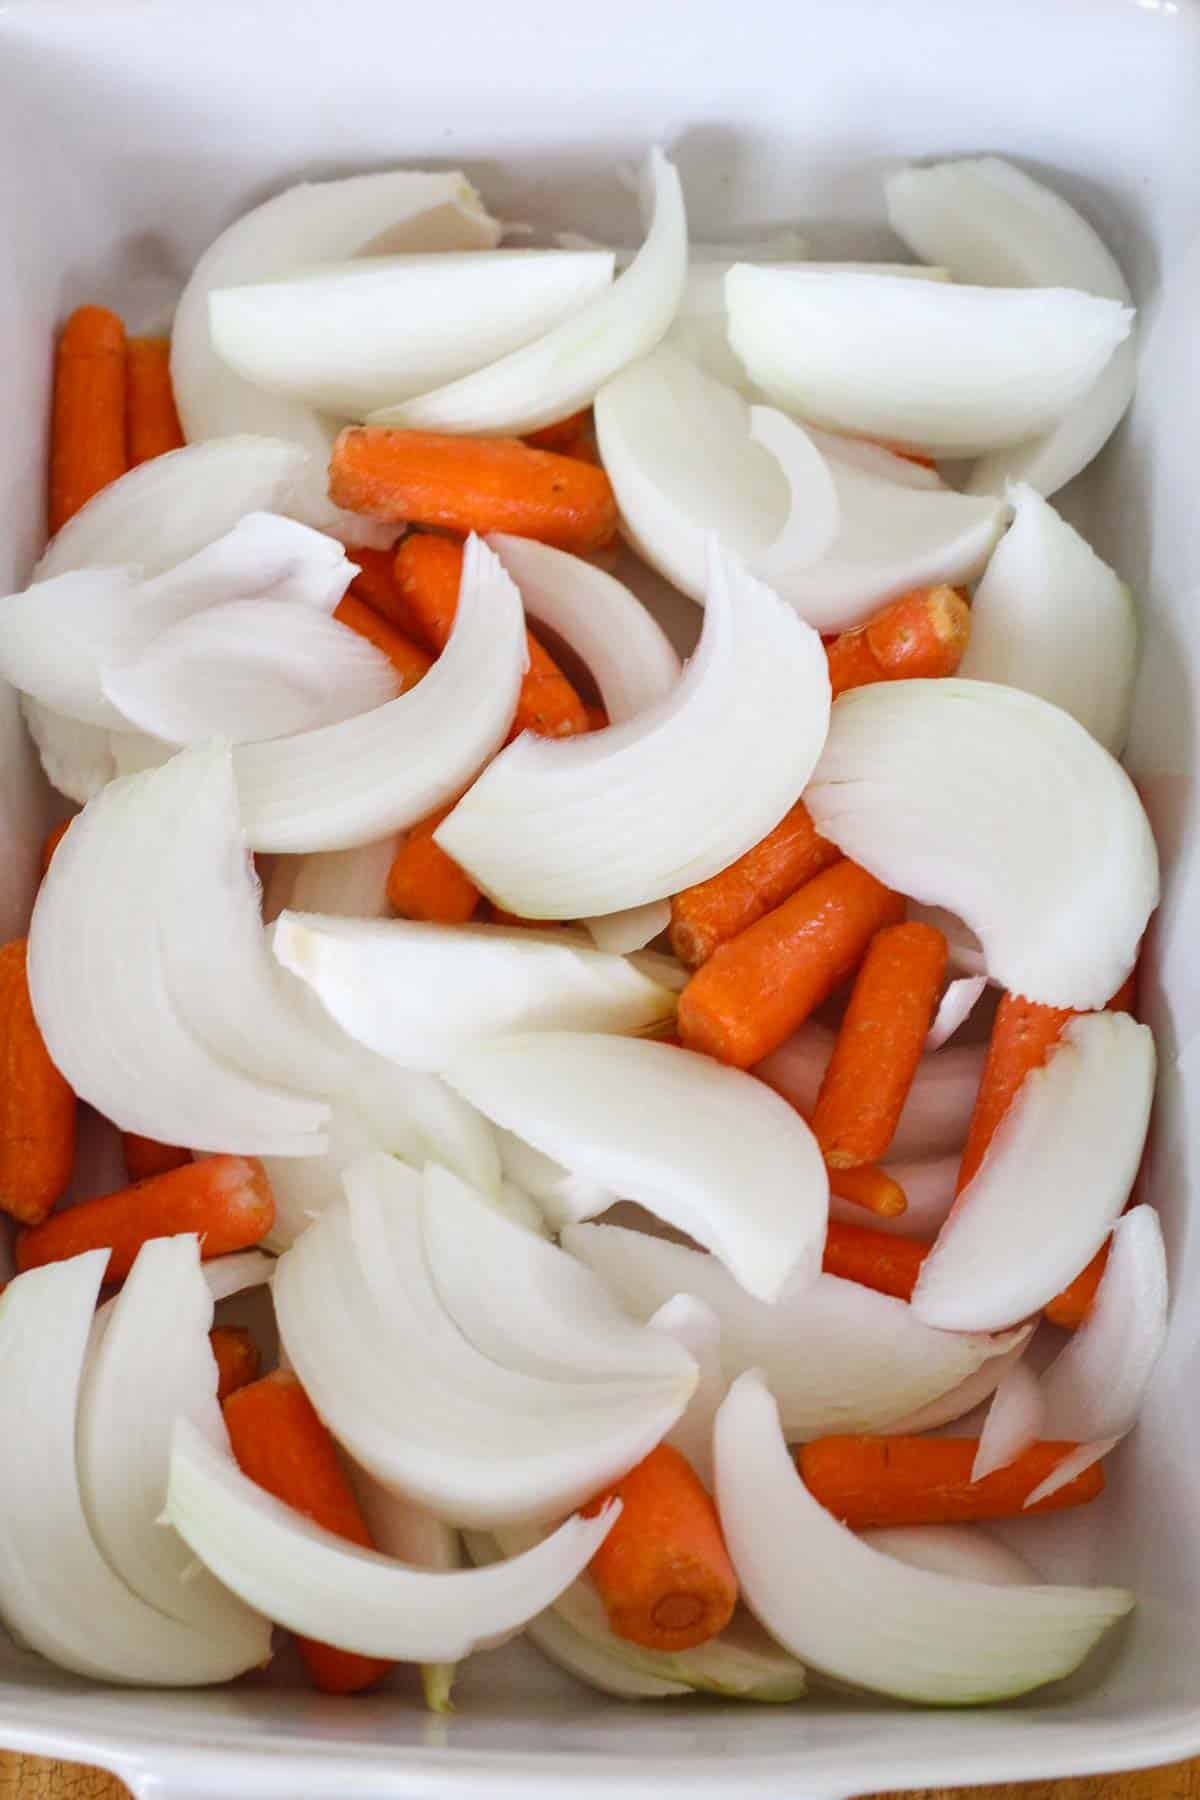 Chopped onions and carrots ready in the baking pan.